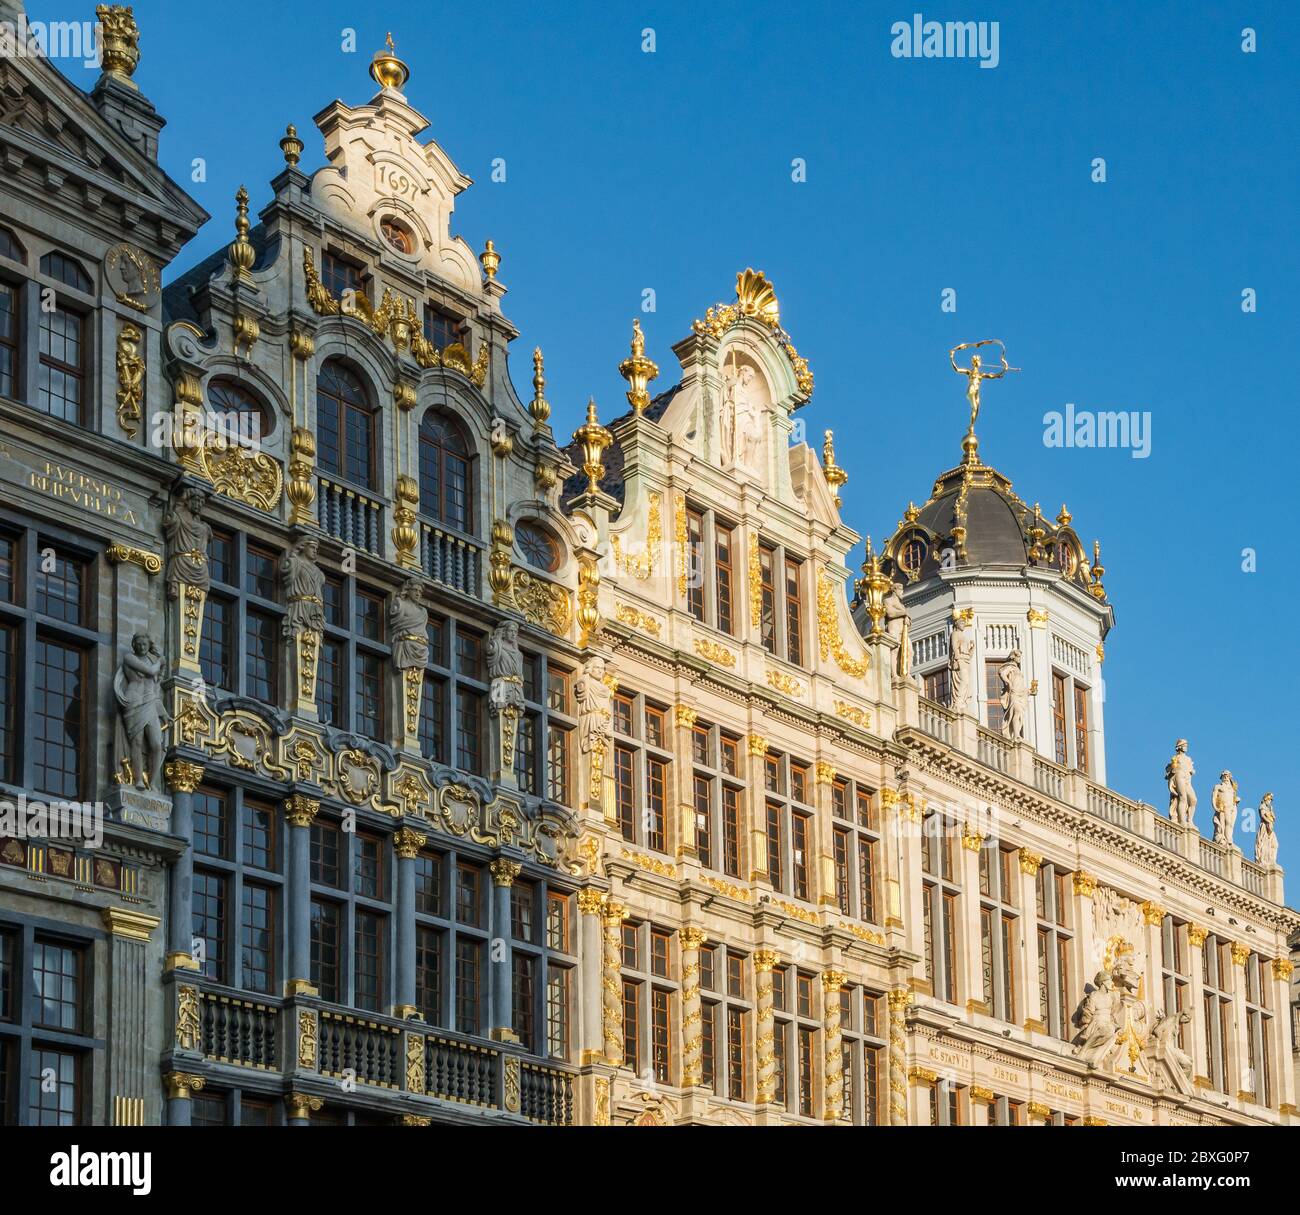 Facade of the Baroque Palace in the Grand Place square of historical centre of Brussels, Belgium, Europe Stock Photo